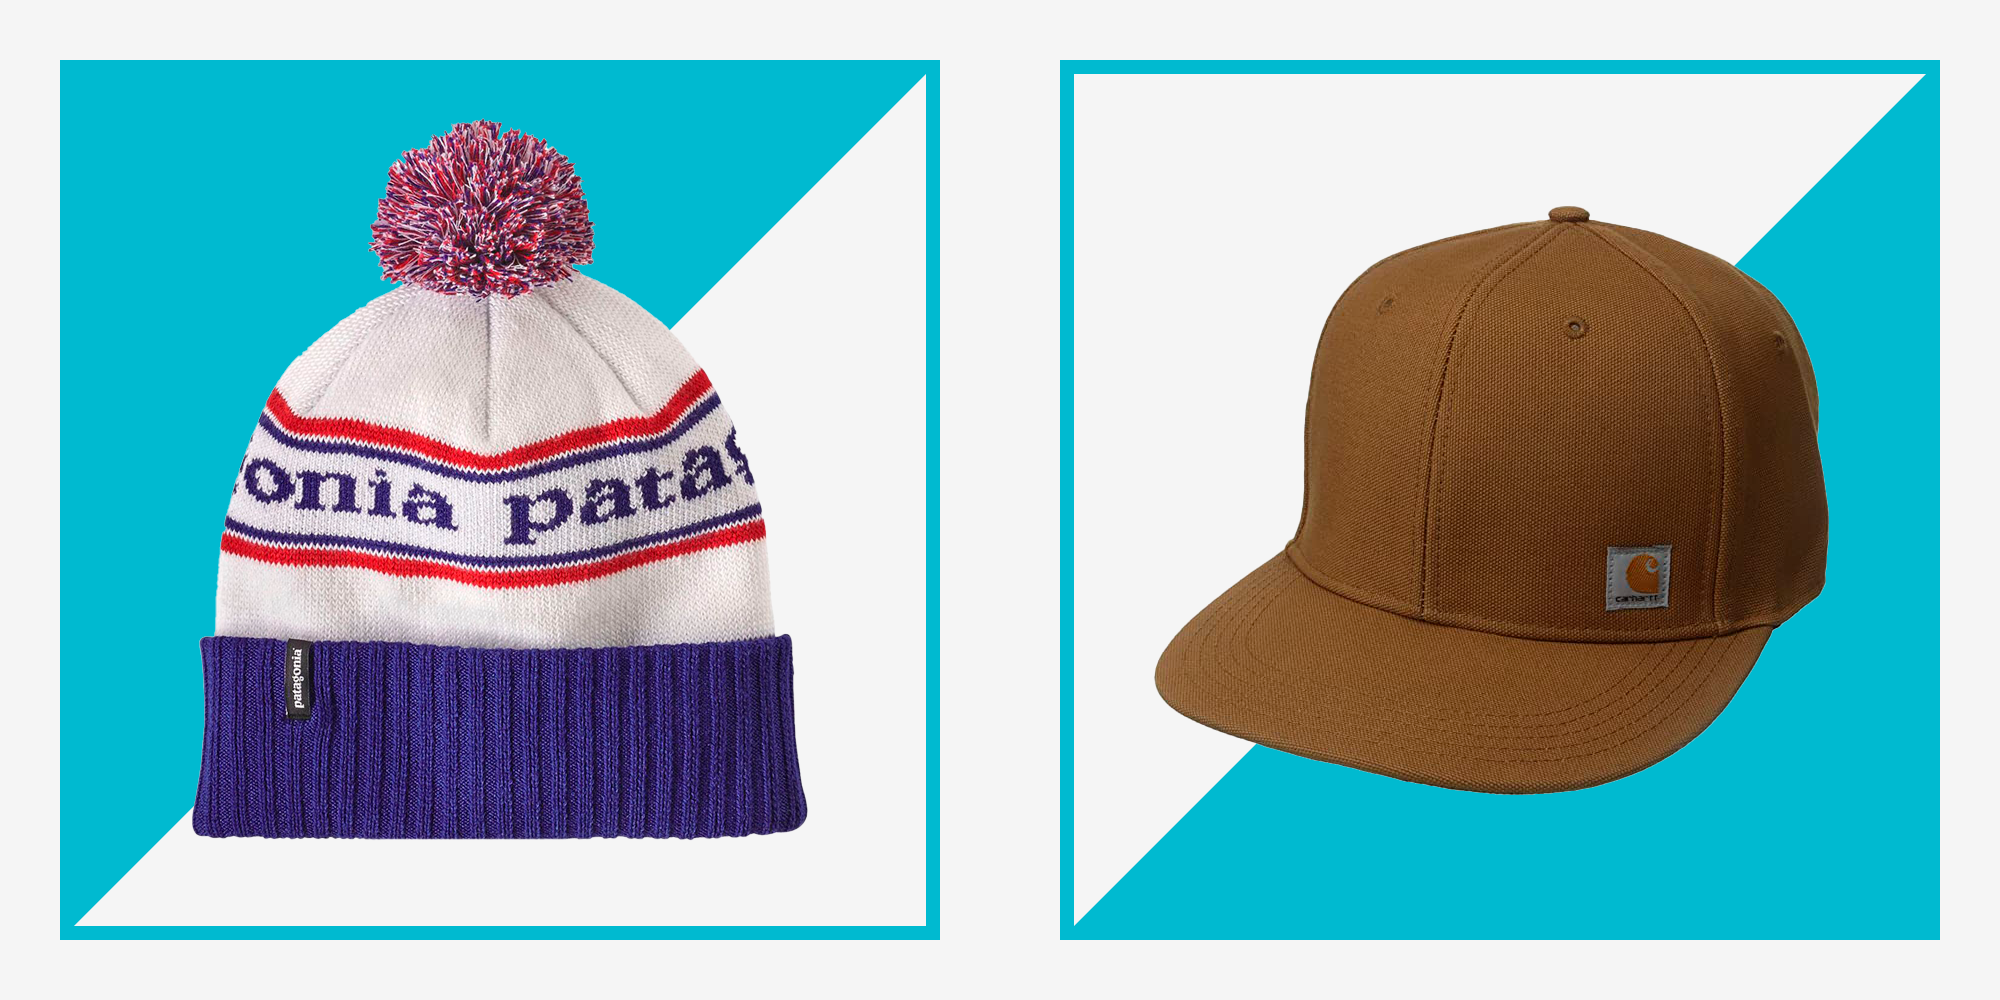 The Stylish Gent's Guide To Winter Hats, The Journal